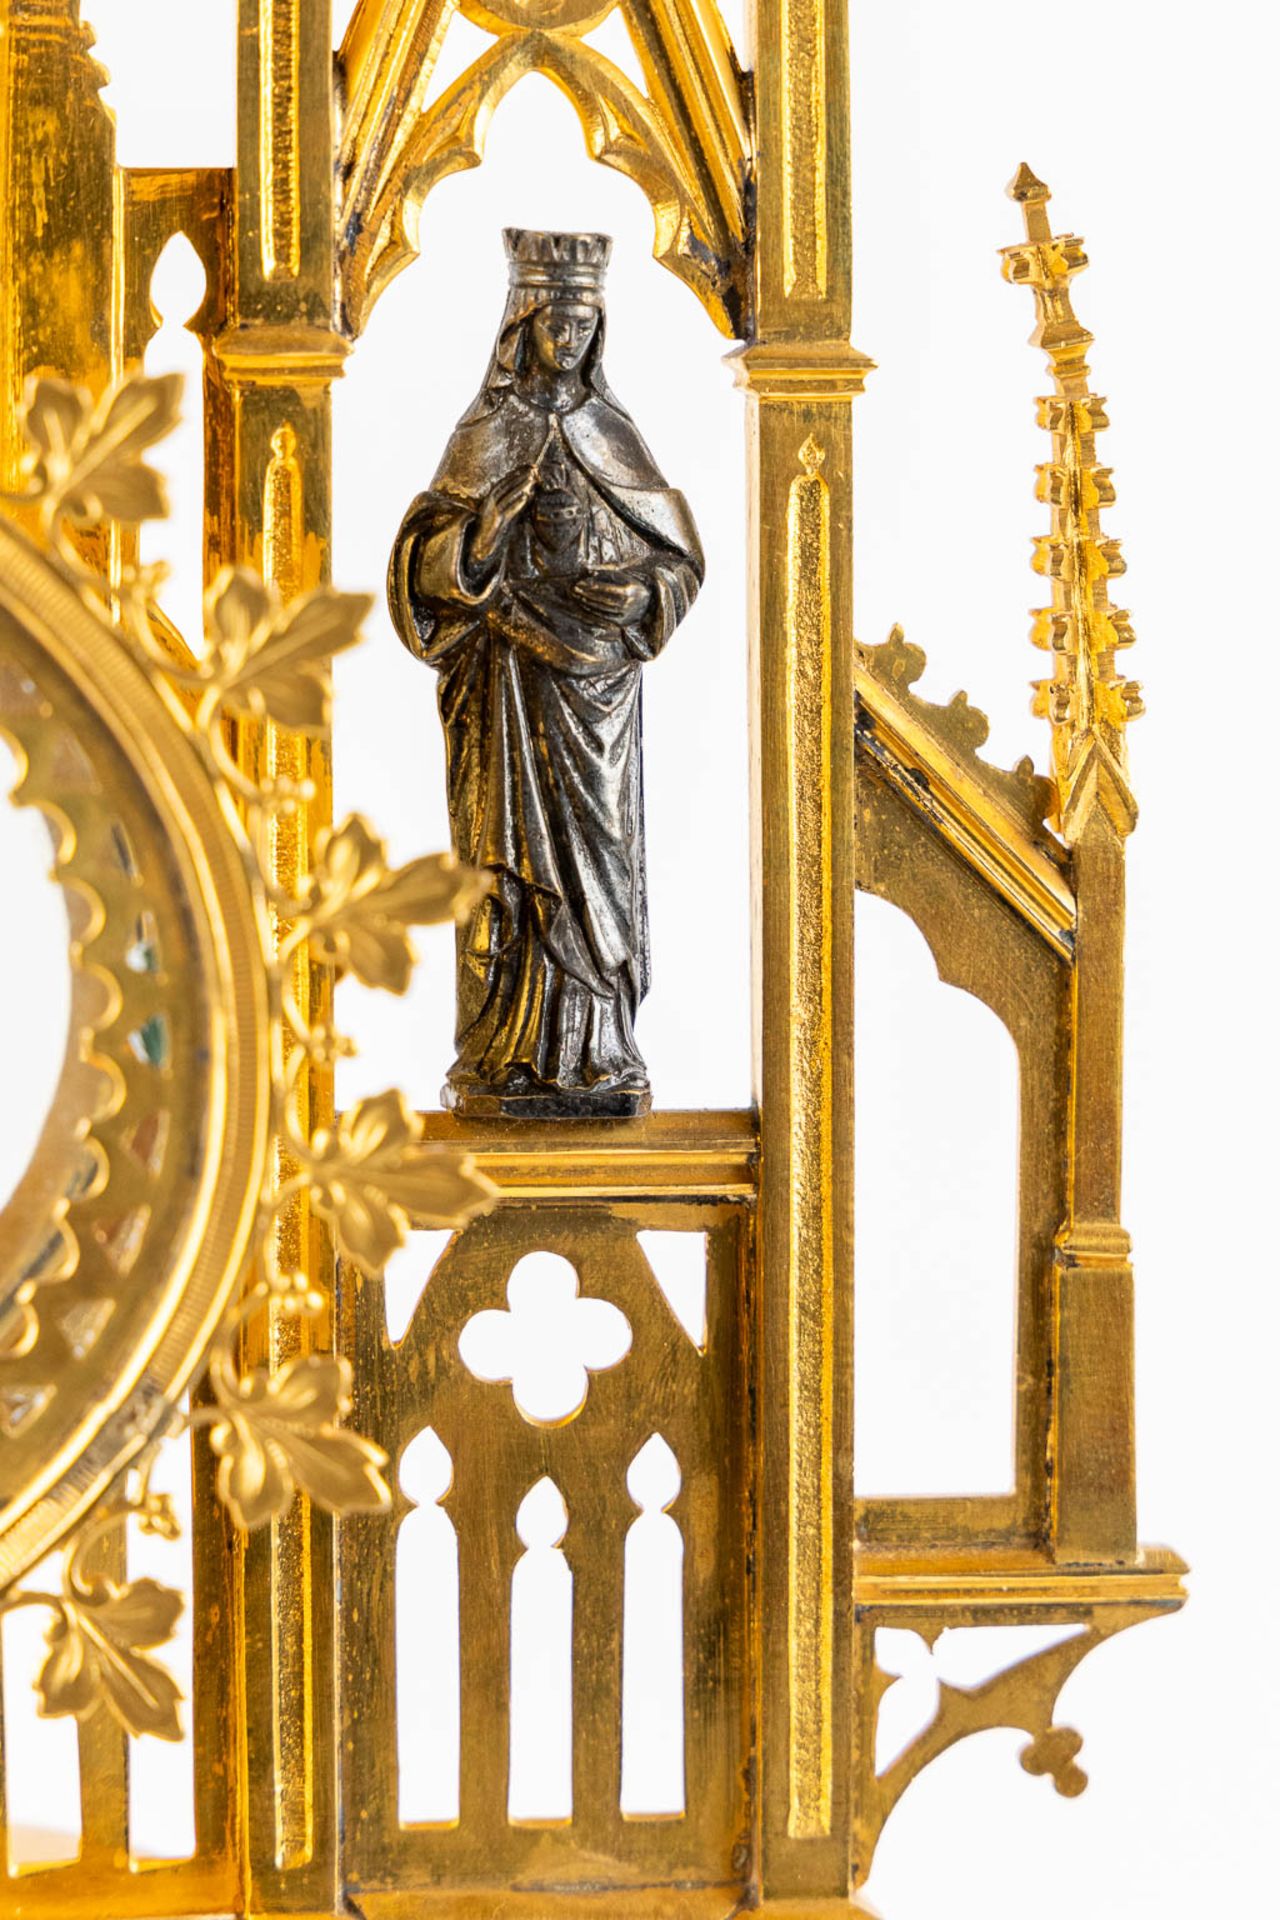 A Tower monstrance, gilt and silver plated brass, Gothic Revival. 19th C. (W:21,5 x H:58 cm) - Image 22 of 22